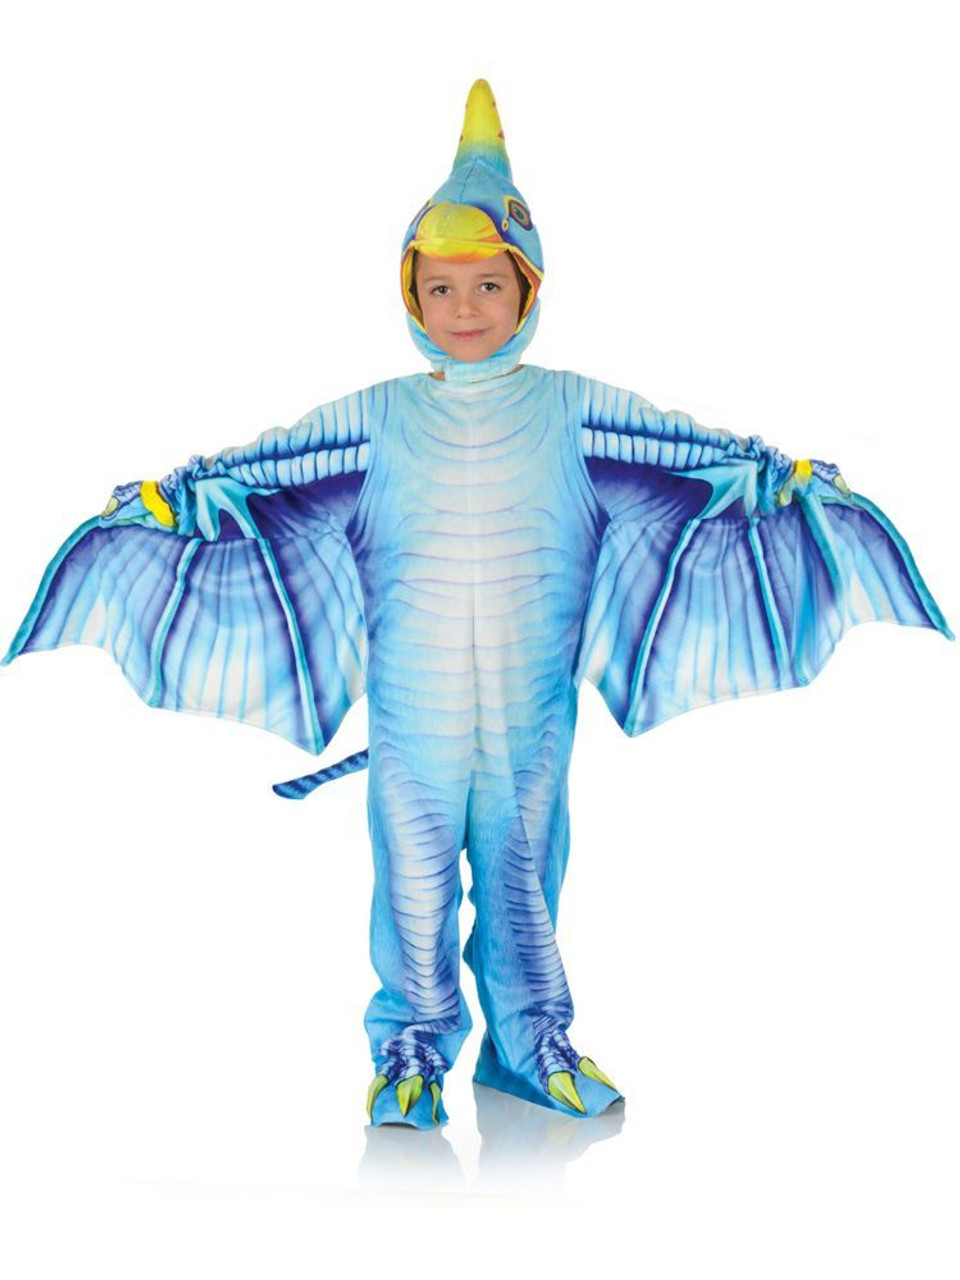 Toddler Pterodactyl Costume - Blue